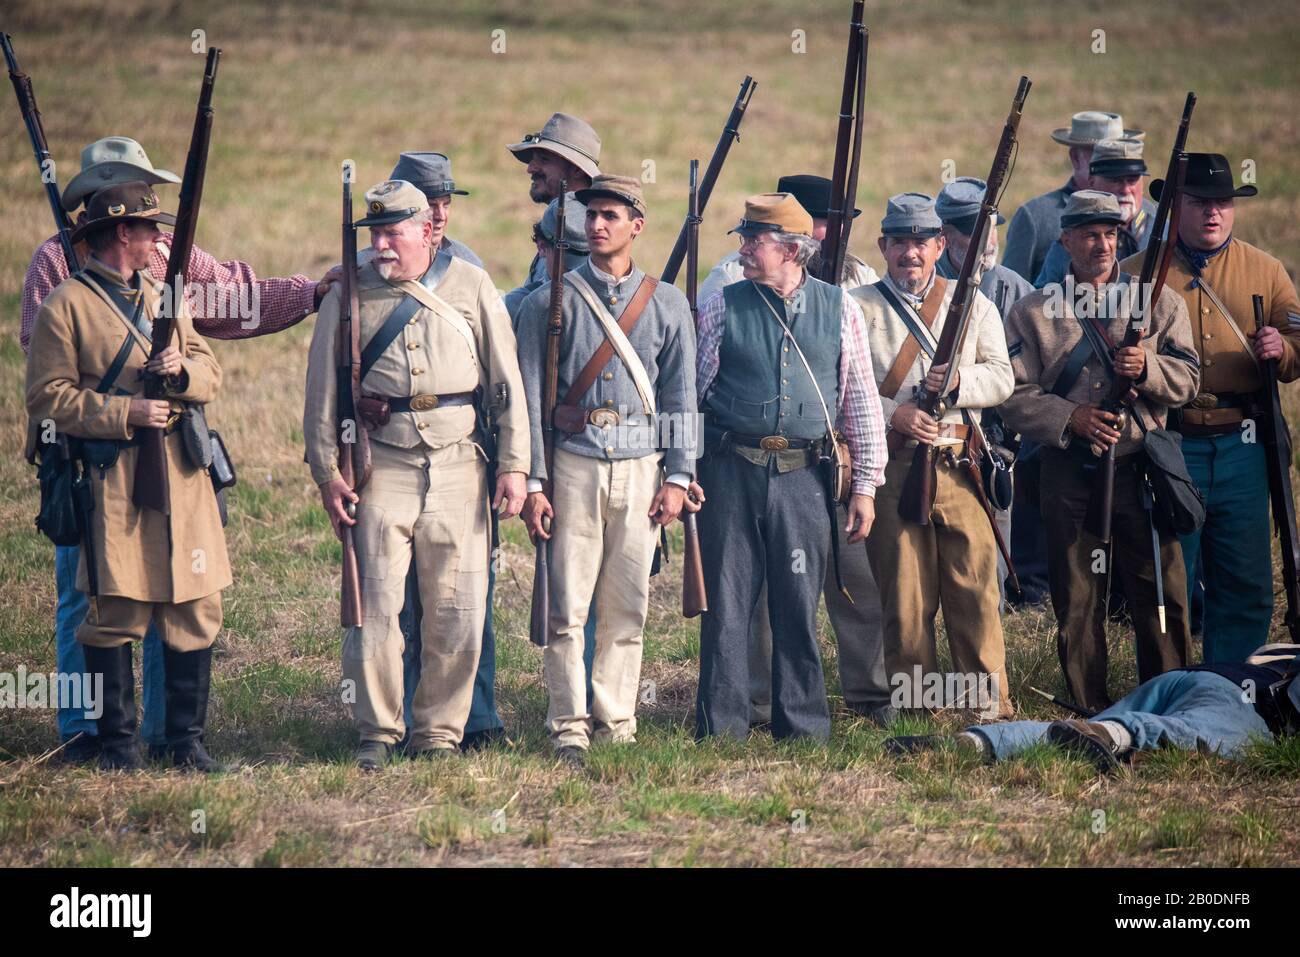 Brooksville, FL - January 18, 2020: Reenactors line up at the end of a battle during a Civil War Reenactment in Brooksville, Florida Stock Photo